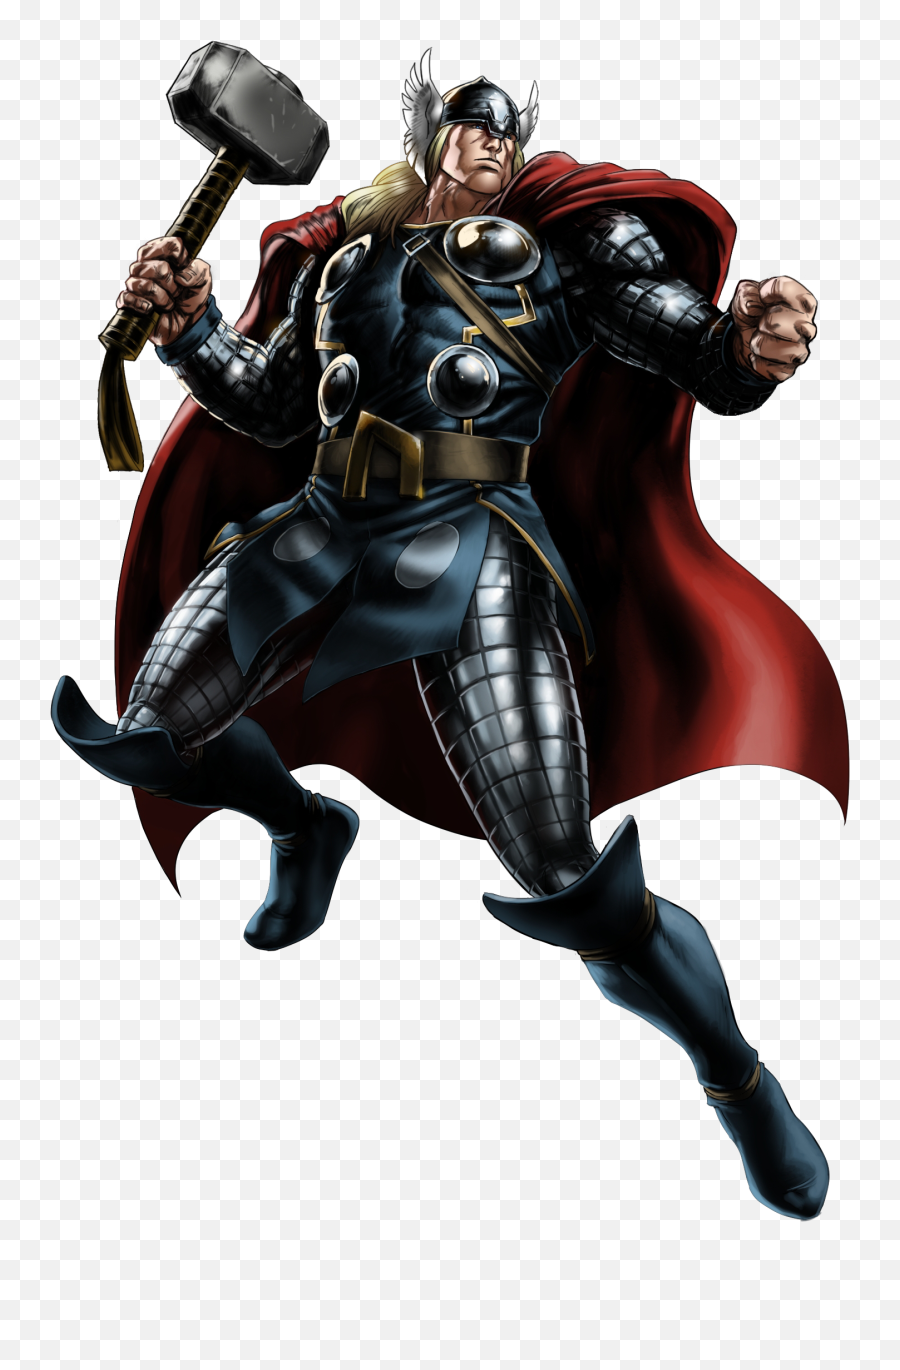 Marvel Avengers Transparent U0026 Png Clipart Free Download - Ywd Thor Marvel Avengers Alliance,Avengers Png